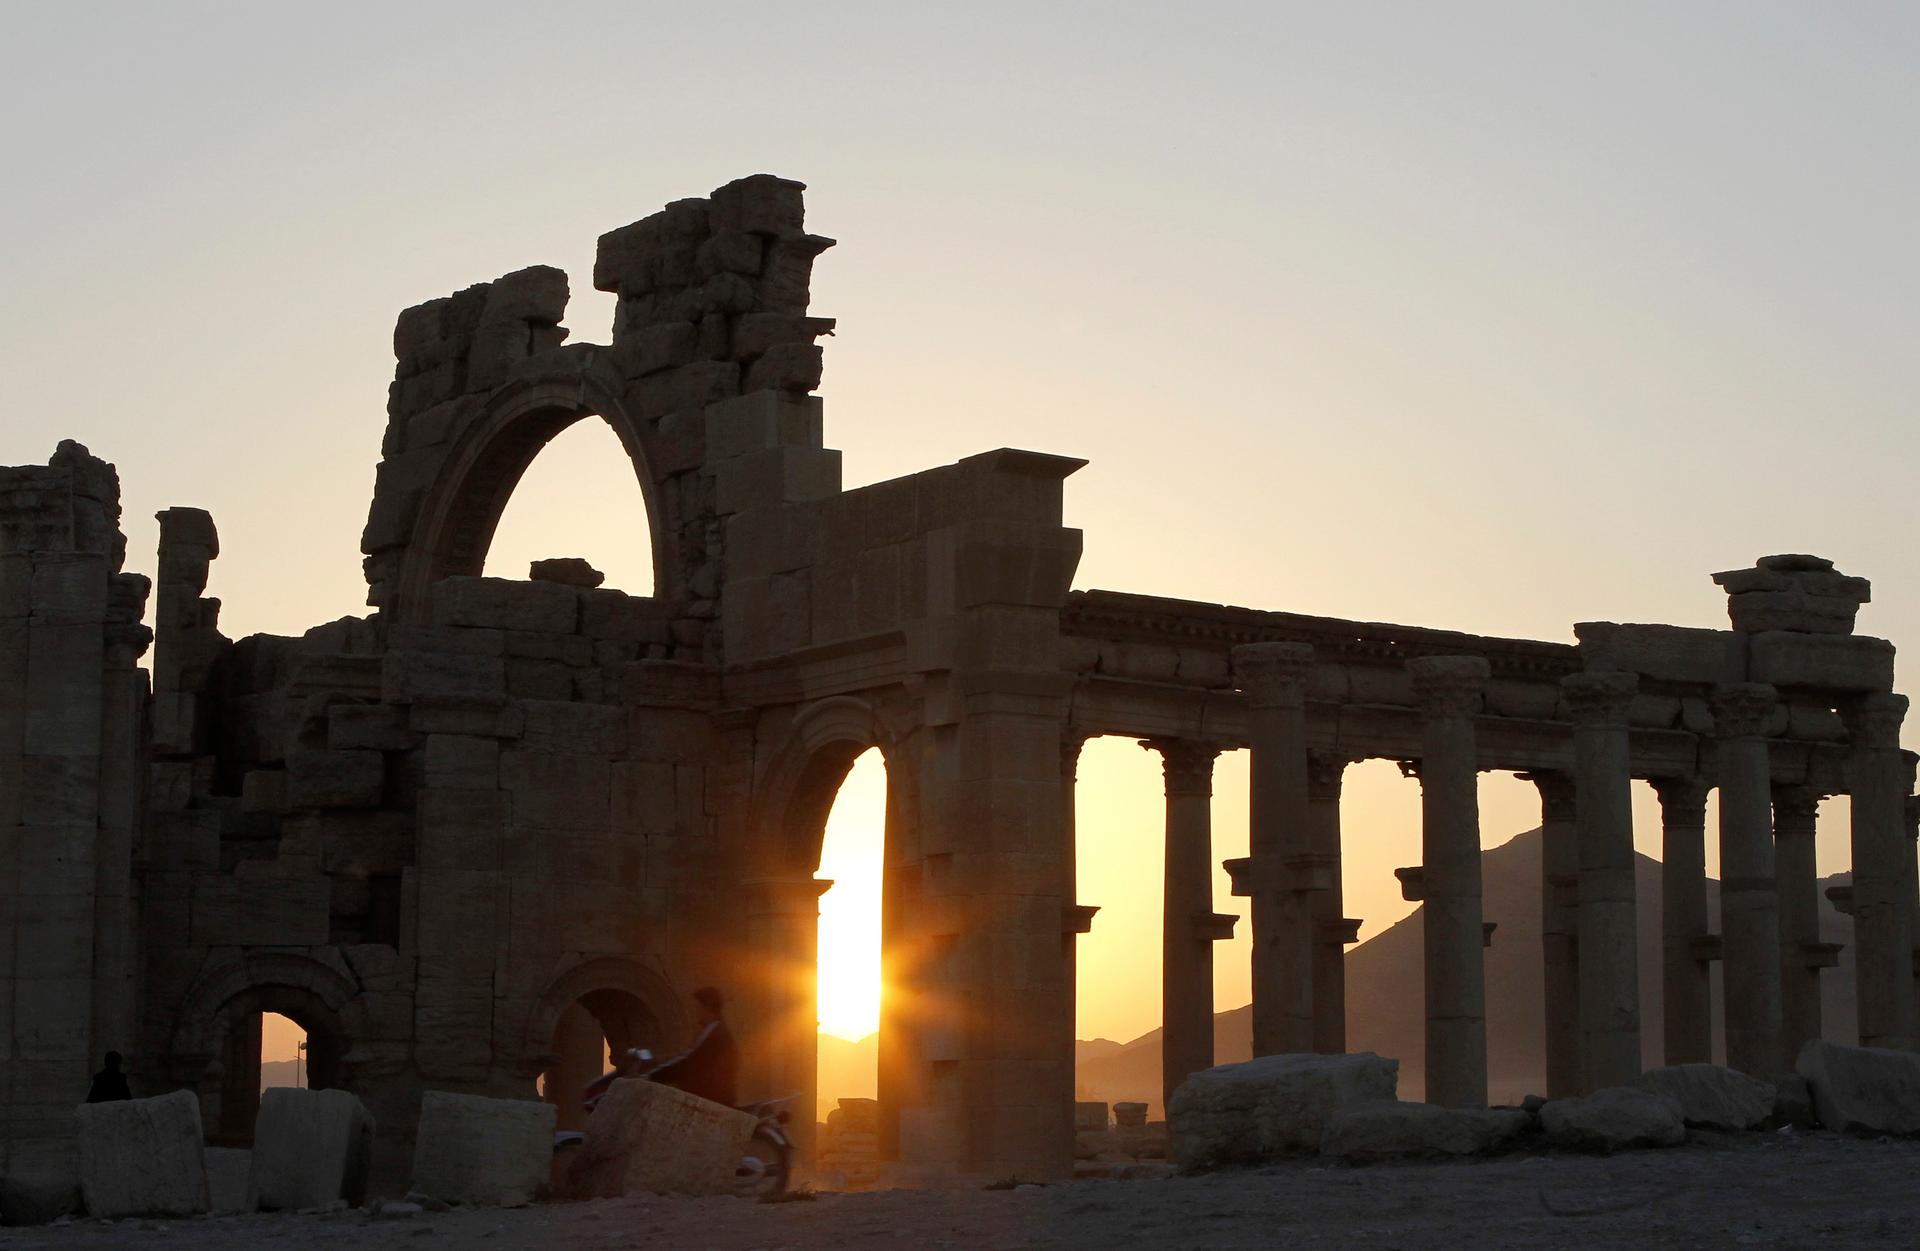 The sun sets behind ruined columns at the historical city of Palmyra, in the Syrian desert, some 240km (150 miles) northeast the capital of Damascus November 12, 2010.